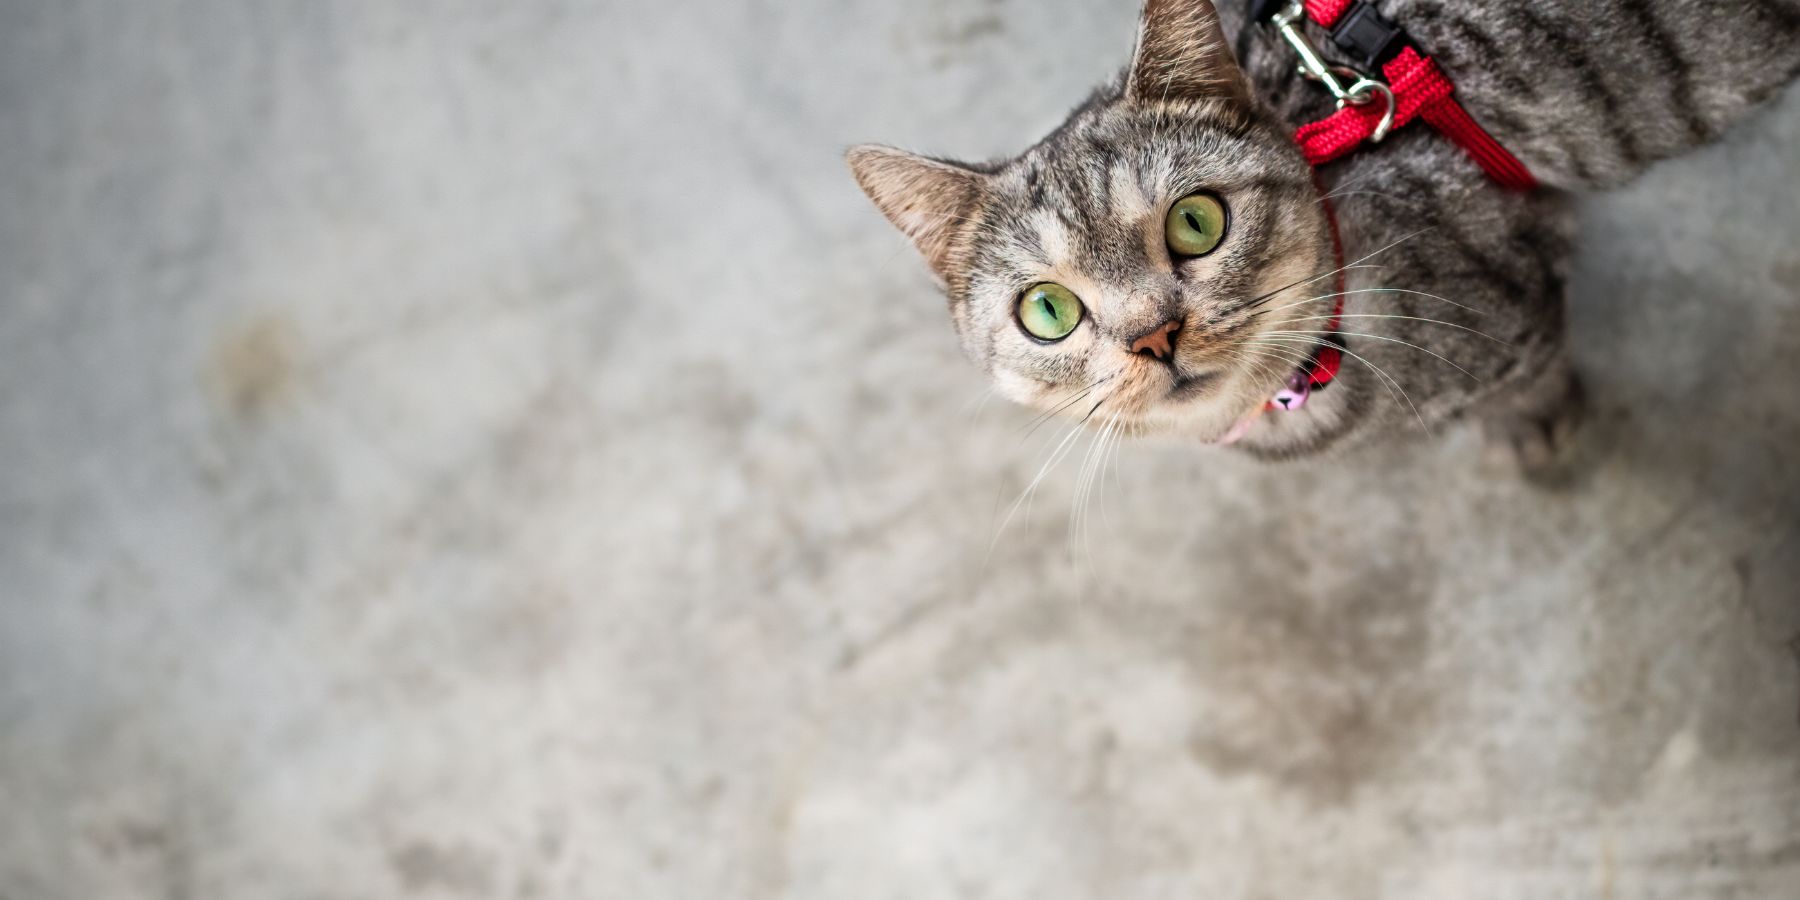 Safety Guidelines for Cat Harness Training